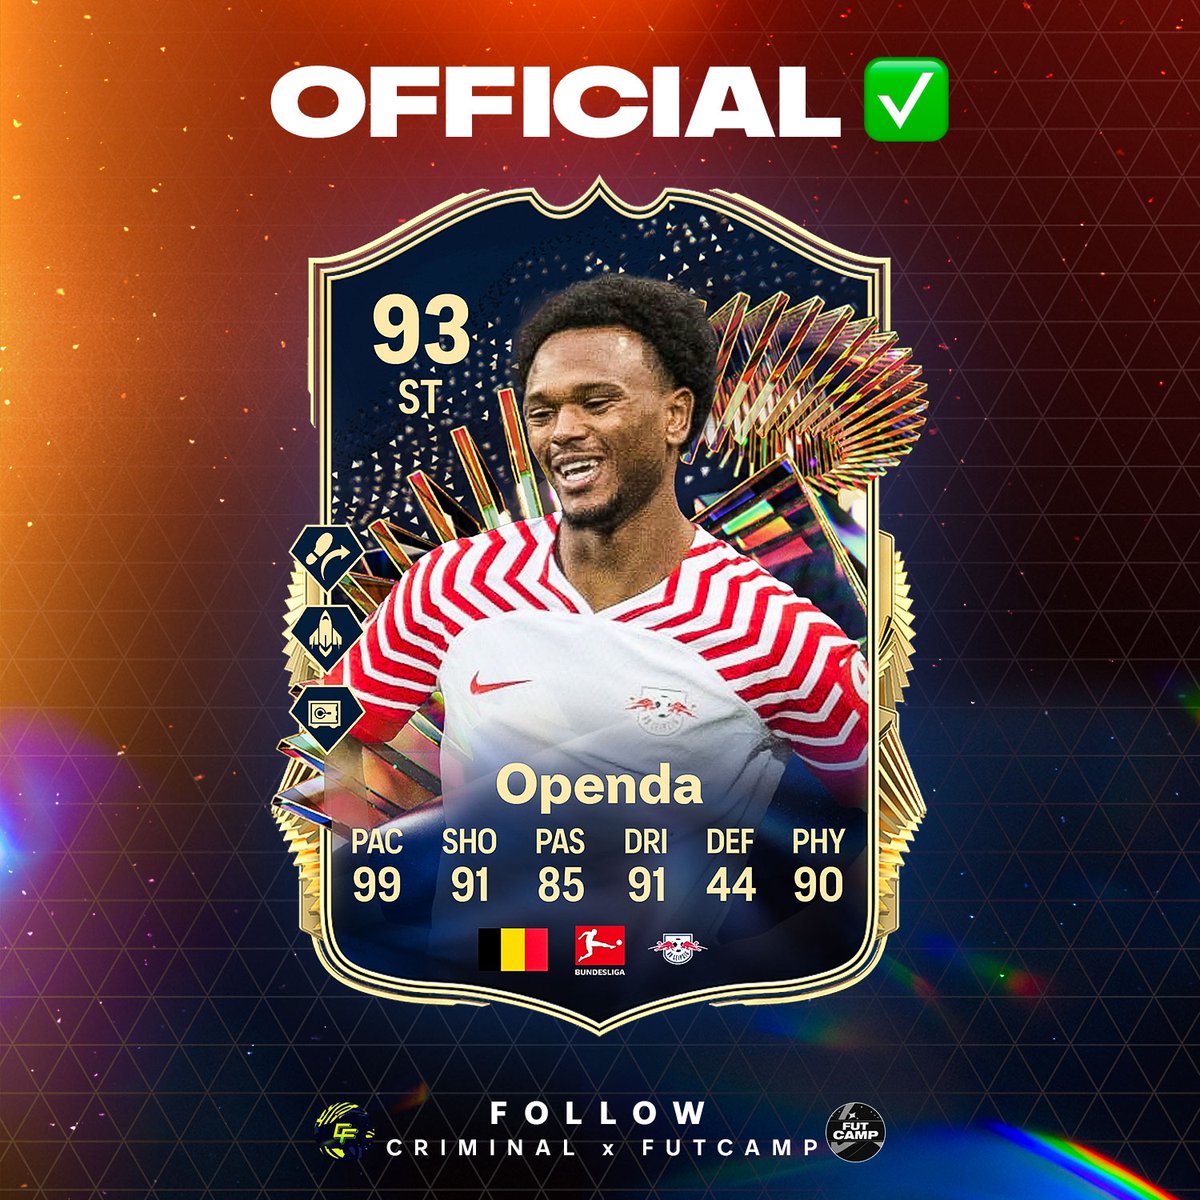 🚨🇧🇪Openda OFFICIAL TOTS card✅ Stats✅ Dynamic image✅ Playstyle+ ✅ Follow @Criminal__x and @fut_camp 🔥 #FC24